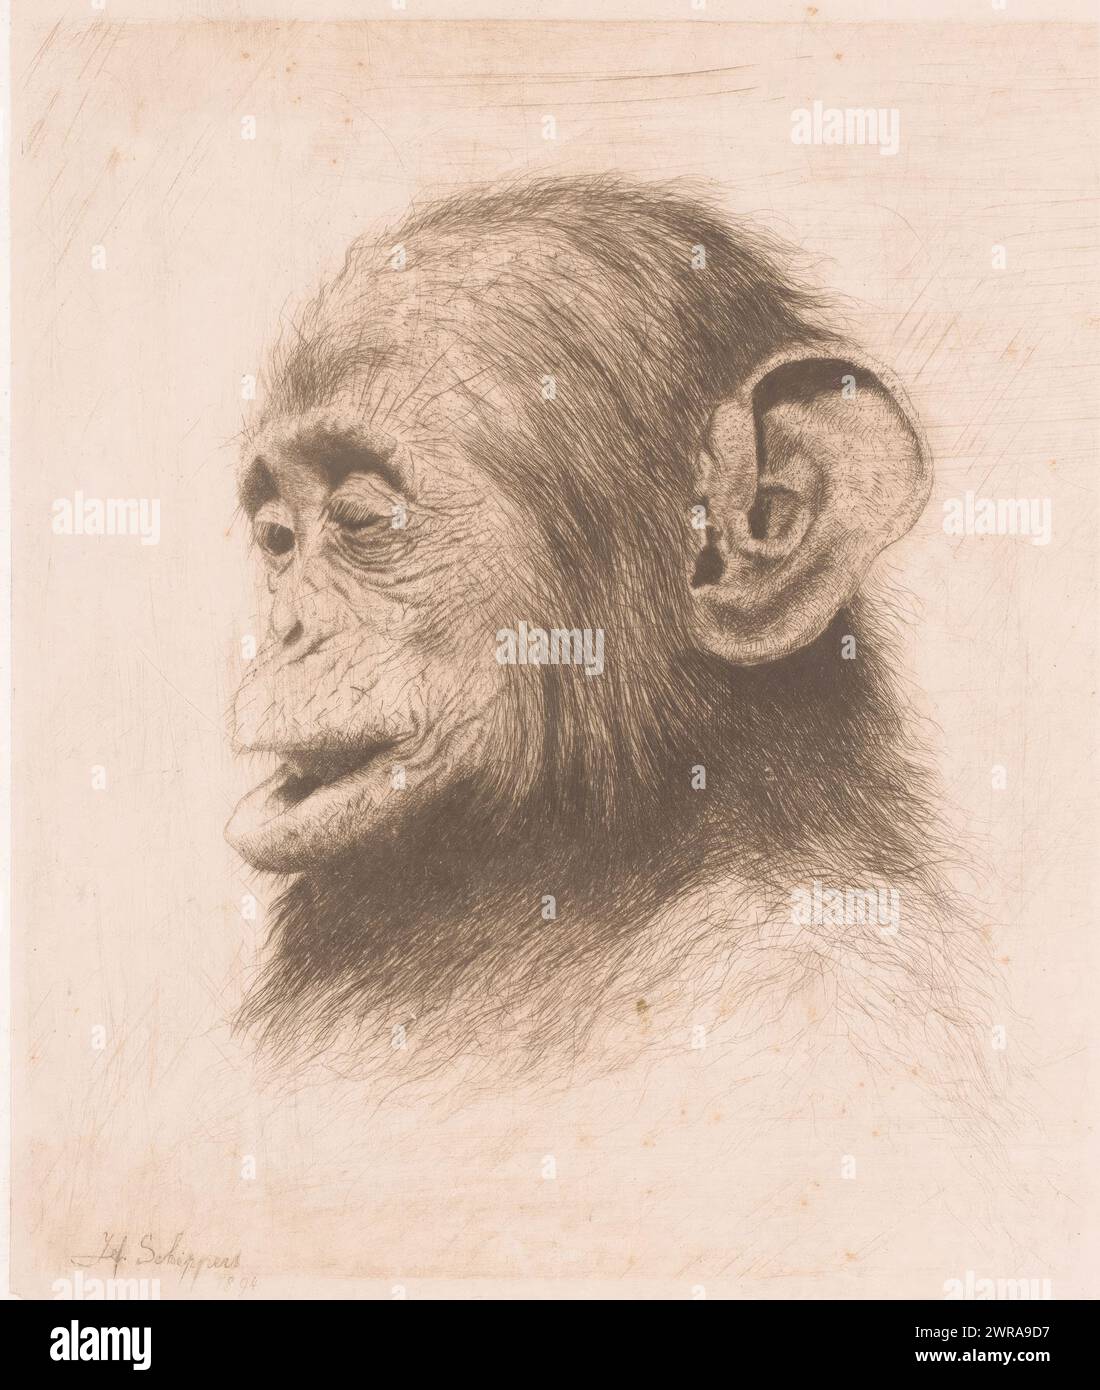 Head of a young chimpanzee, print maker: Joseph Schippers, 1894, paper, etching, height 209 mm × width 179 mm, print Stock Photo